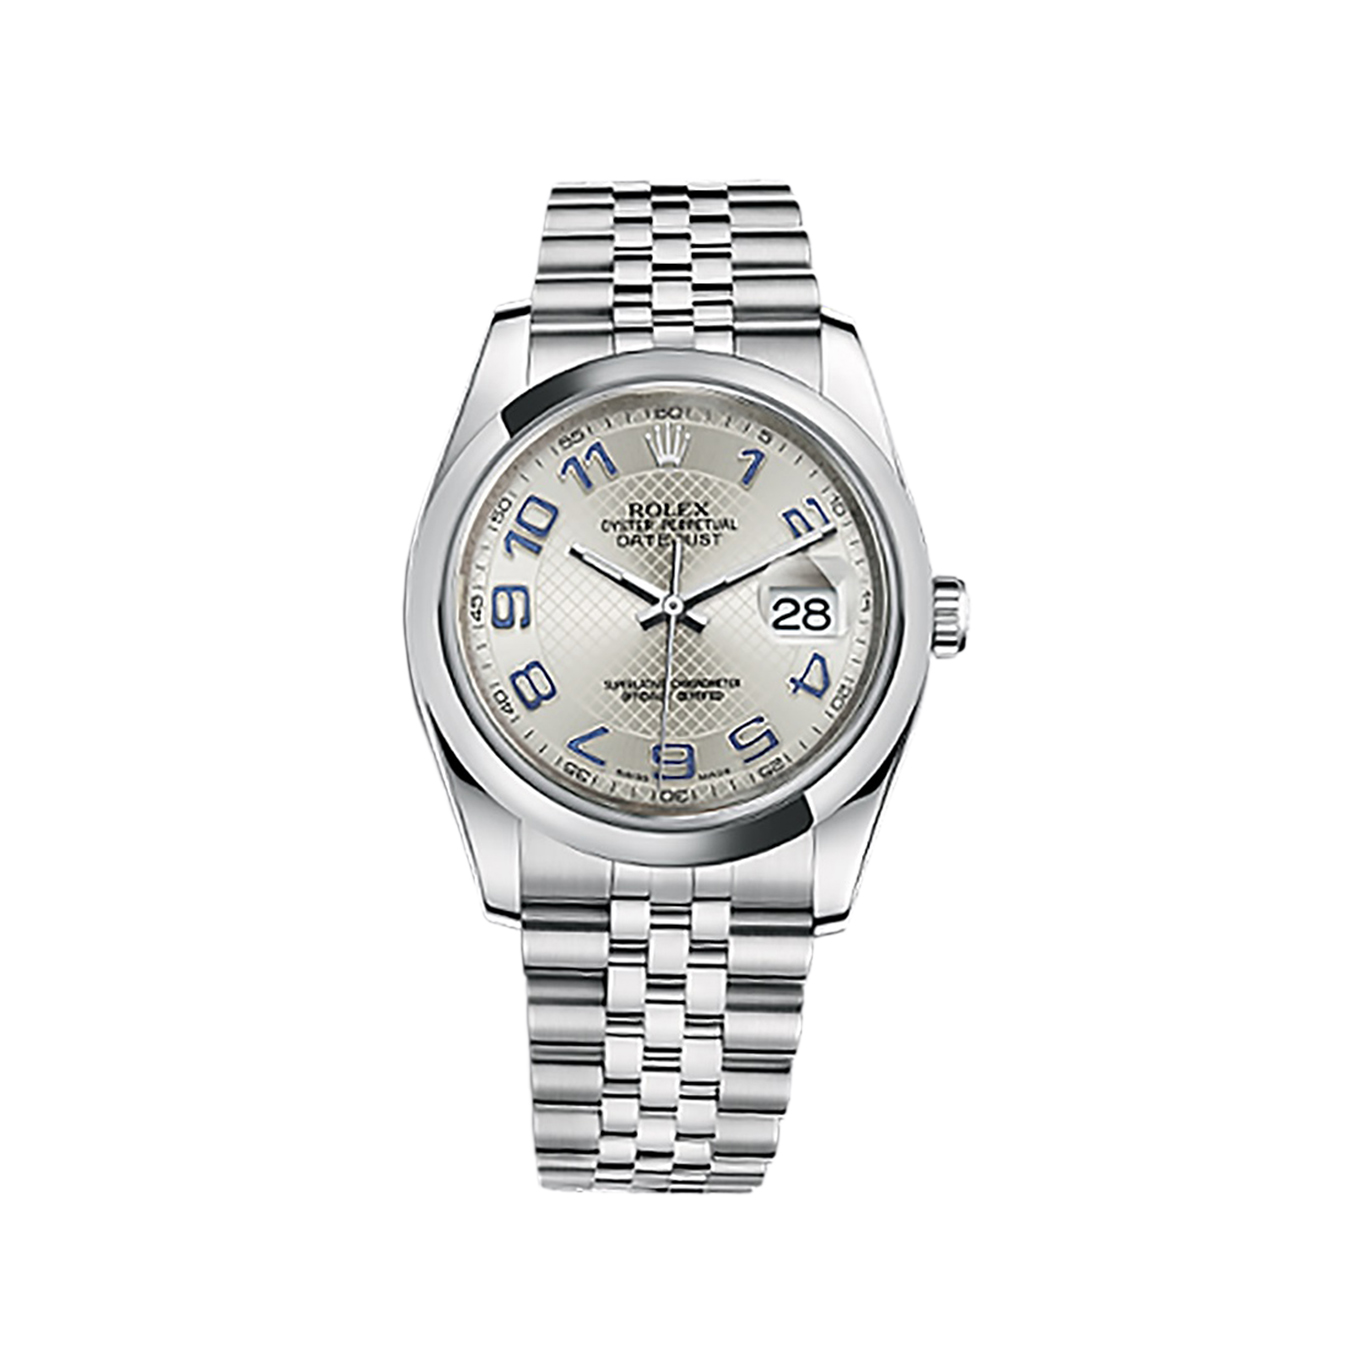 Datejust 36 116200 Stainless Steel Watch (Silver)